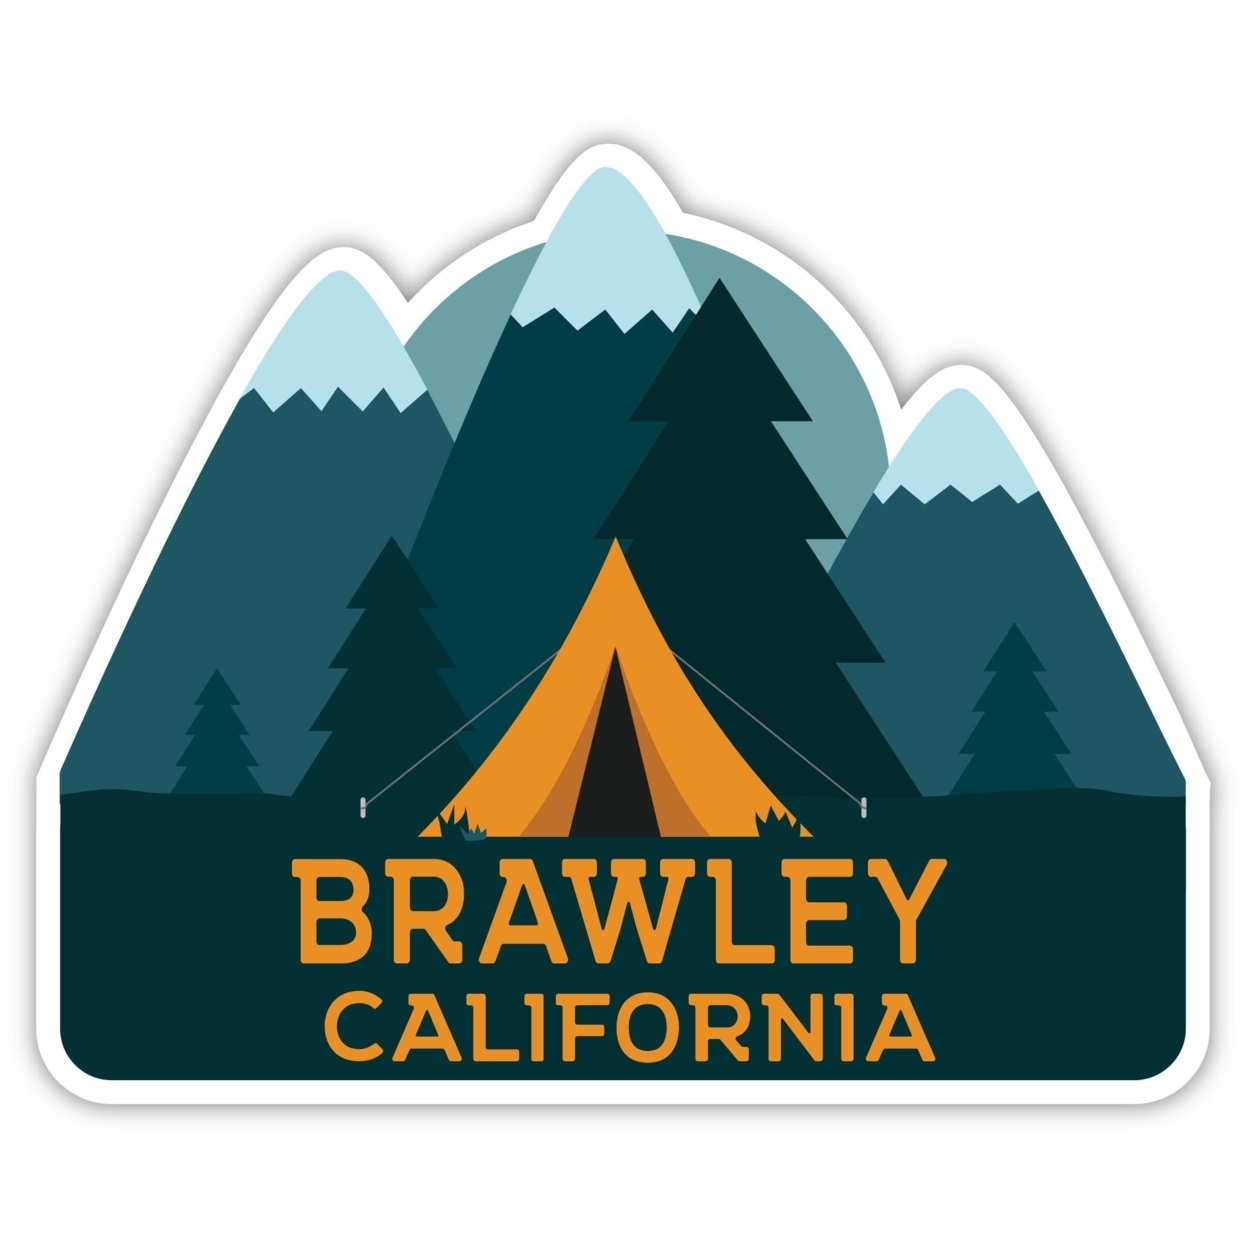 Brawley California Souvenir Decorative Stickers (Choose Theme And Size) - 4-Pack, 12-Inch, Tent